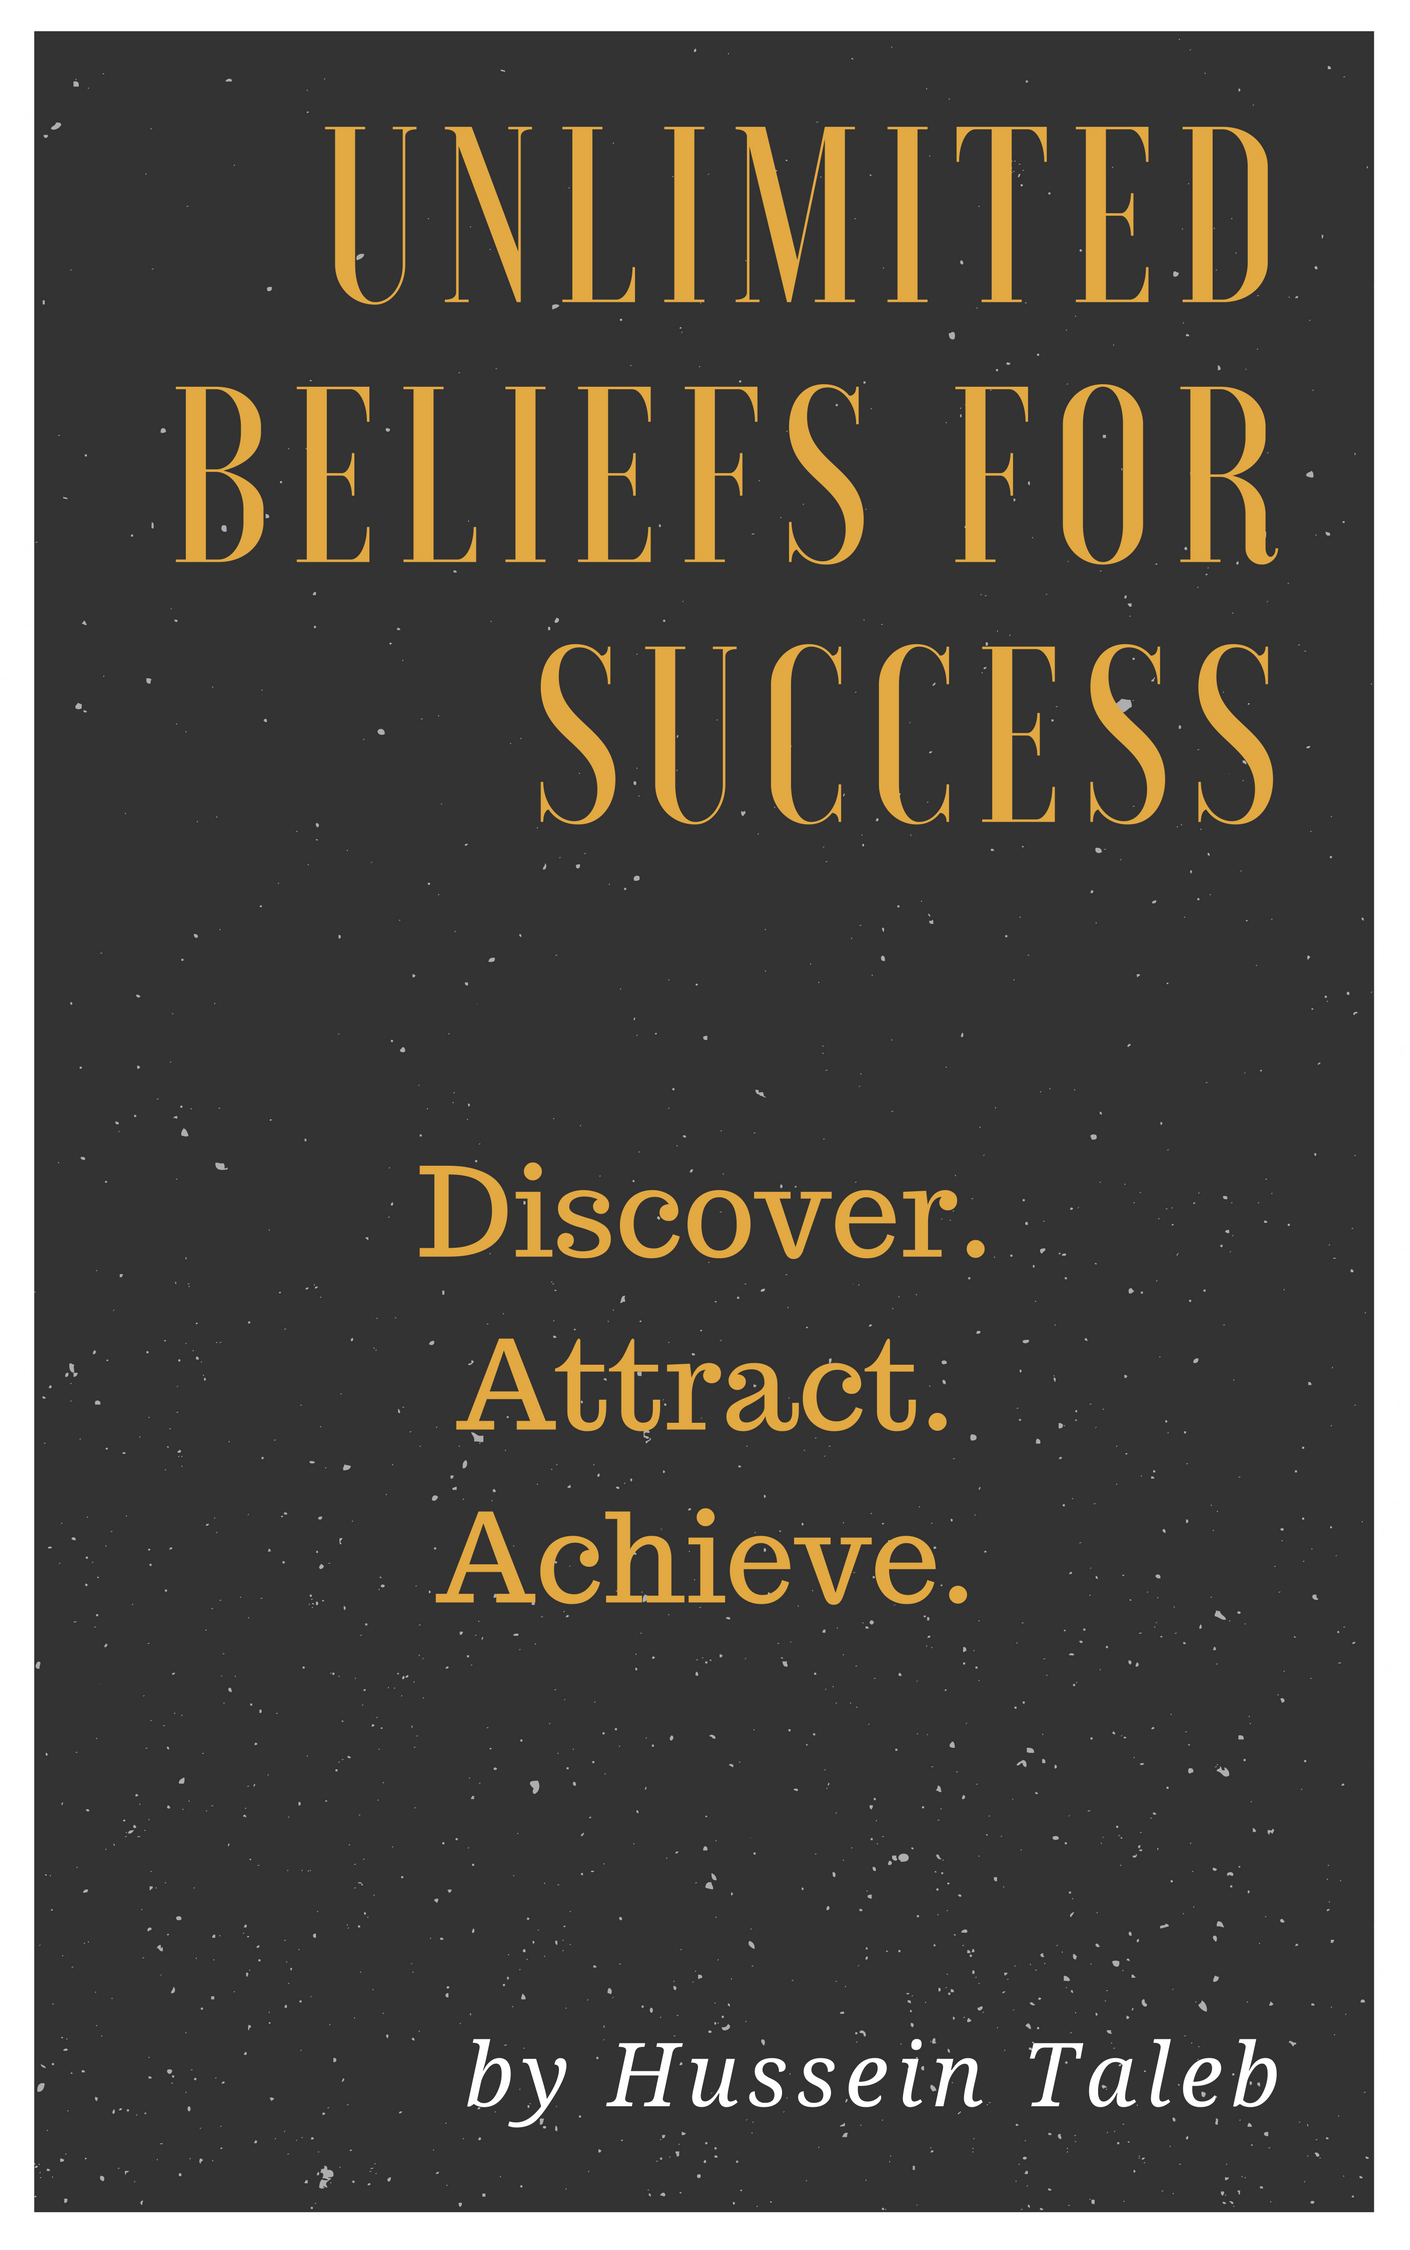 FREE: Unlimited Beliefs for Success: Discover. Attract. Achieve by Hussein Taleb